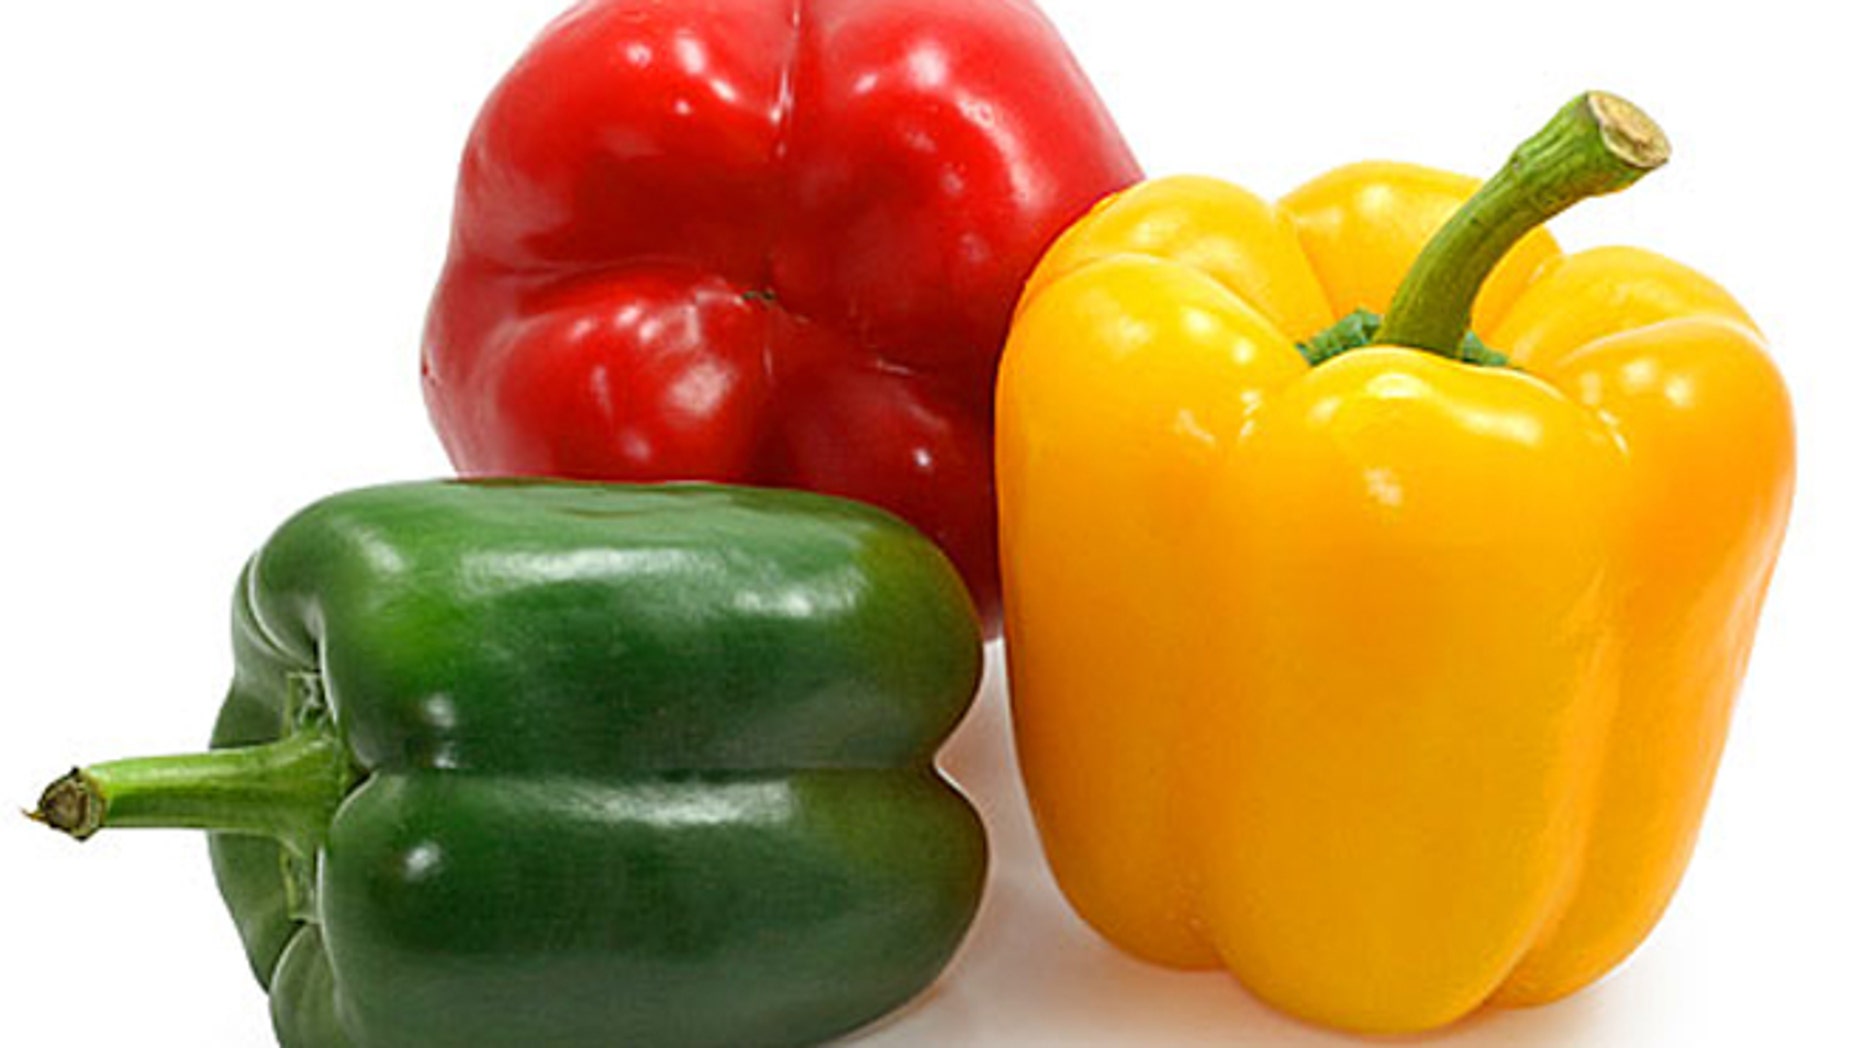 Eating peppers may lower Parkinson's risk | Fox News